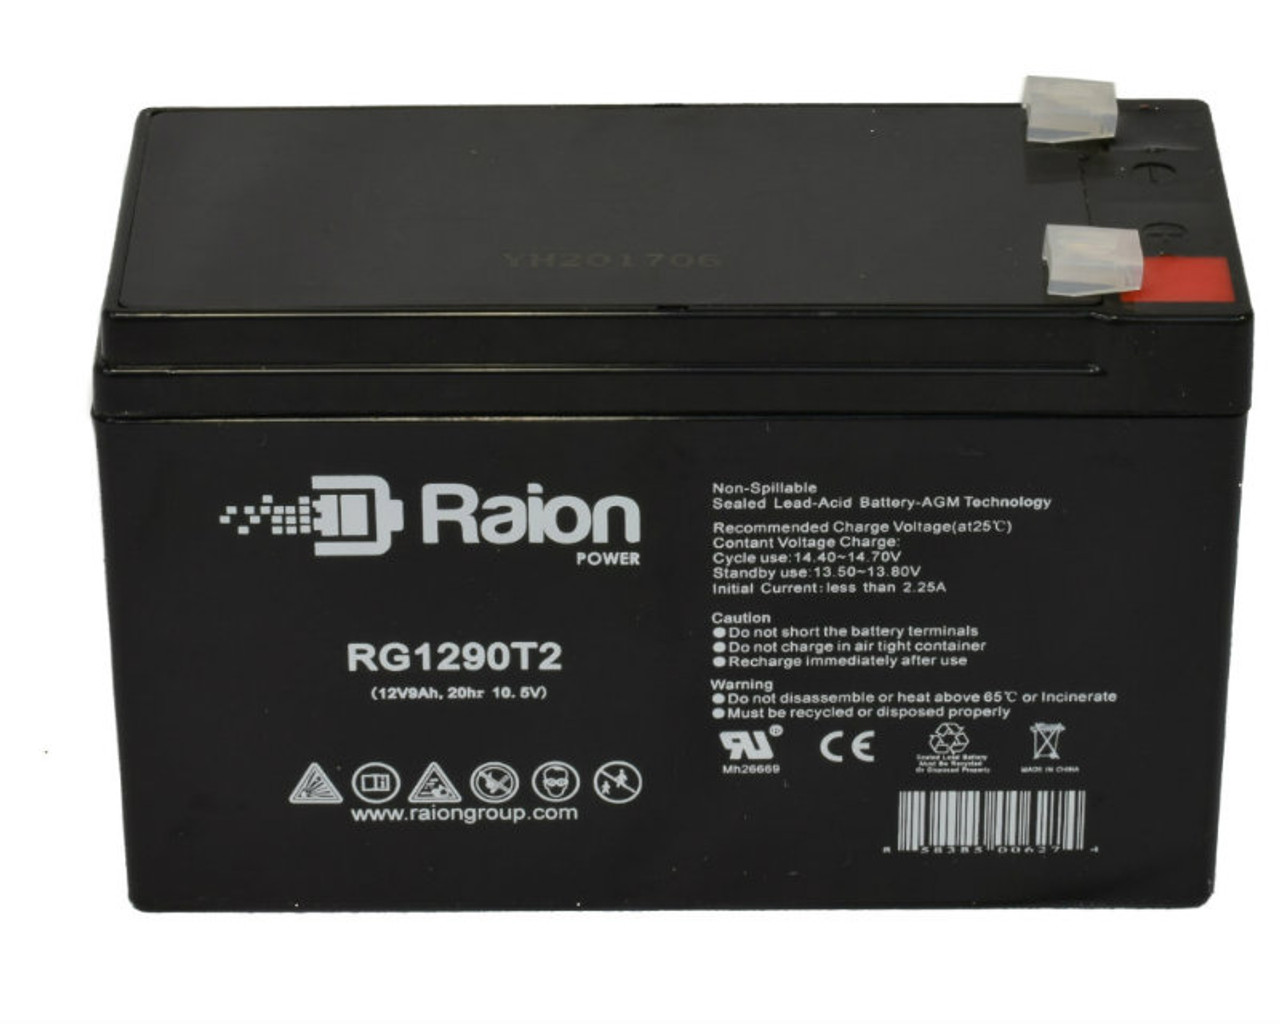 Raion Power RG1290T2 12V 9Ah Lead Acid Battery for Cellpower CPW 50-12